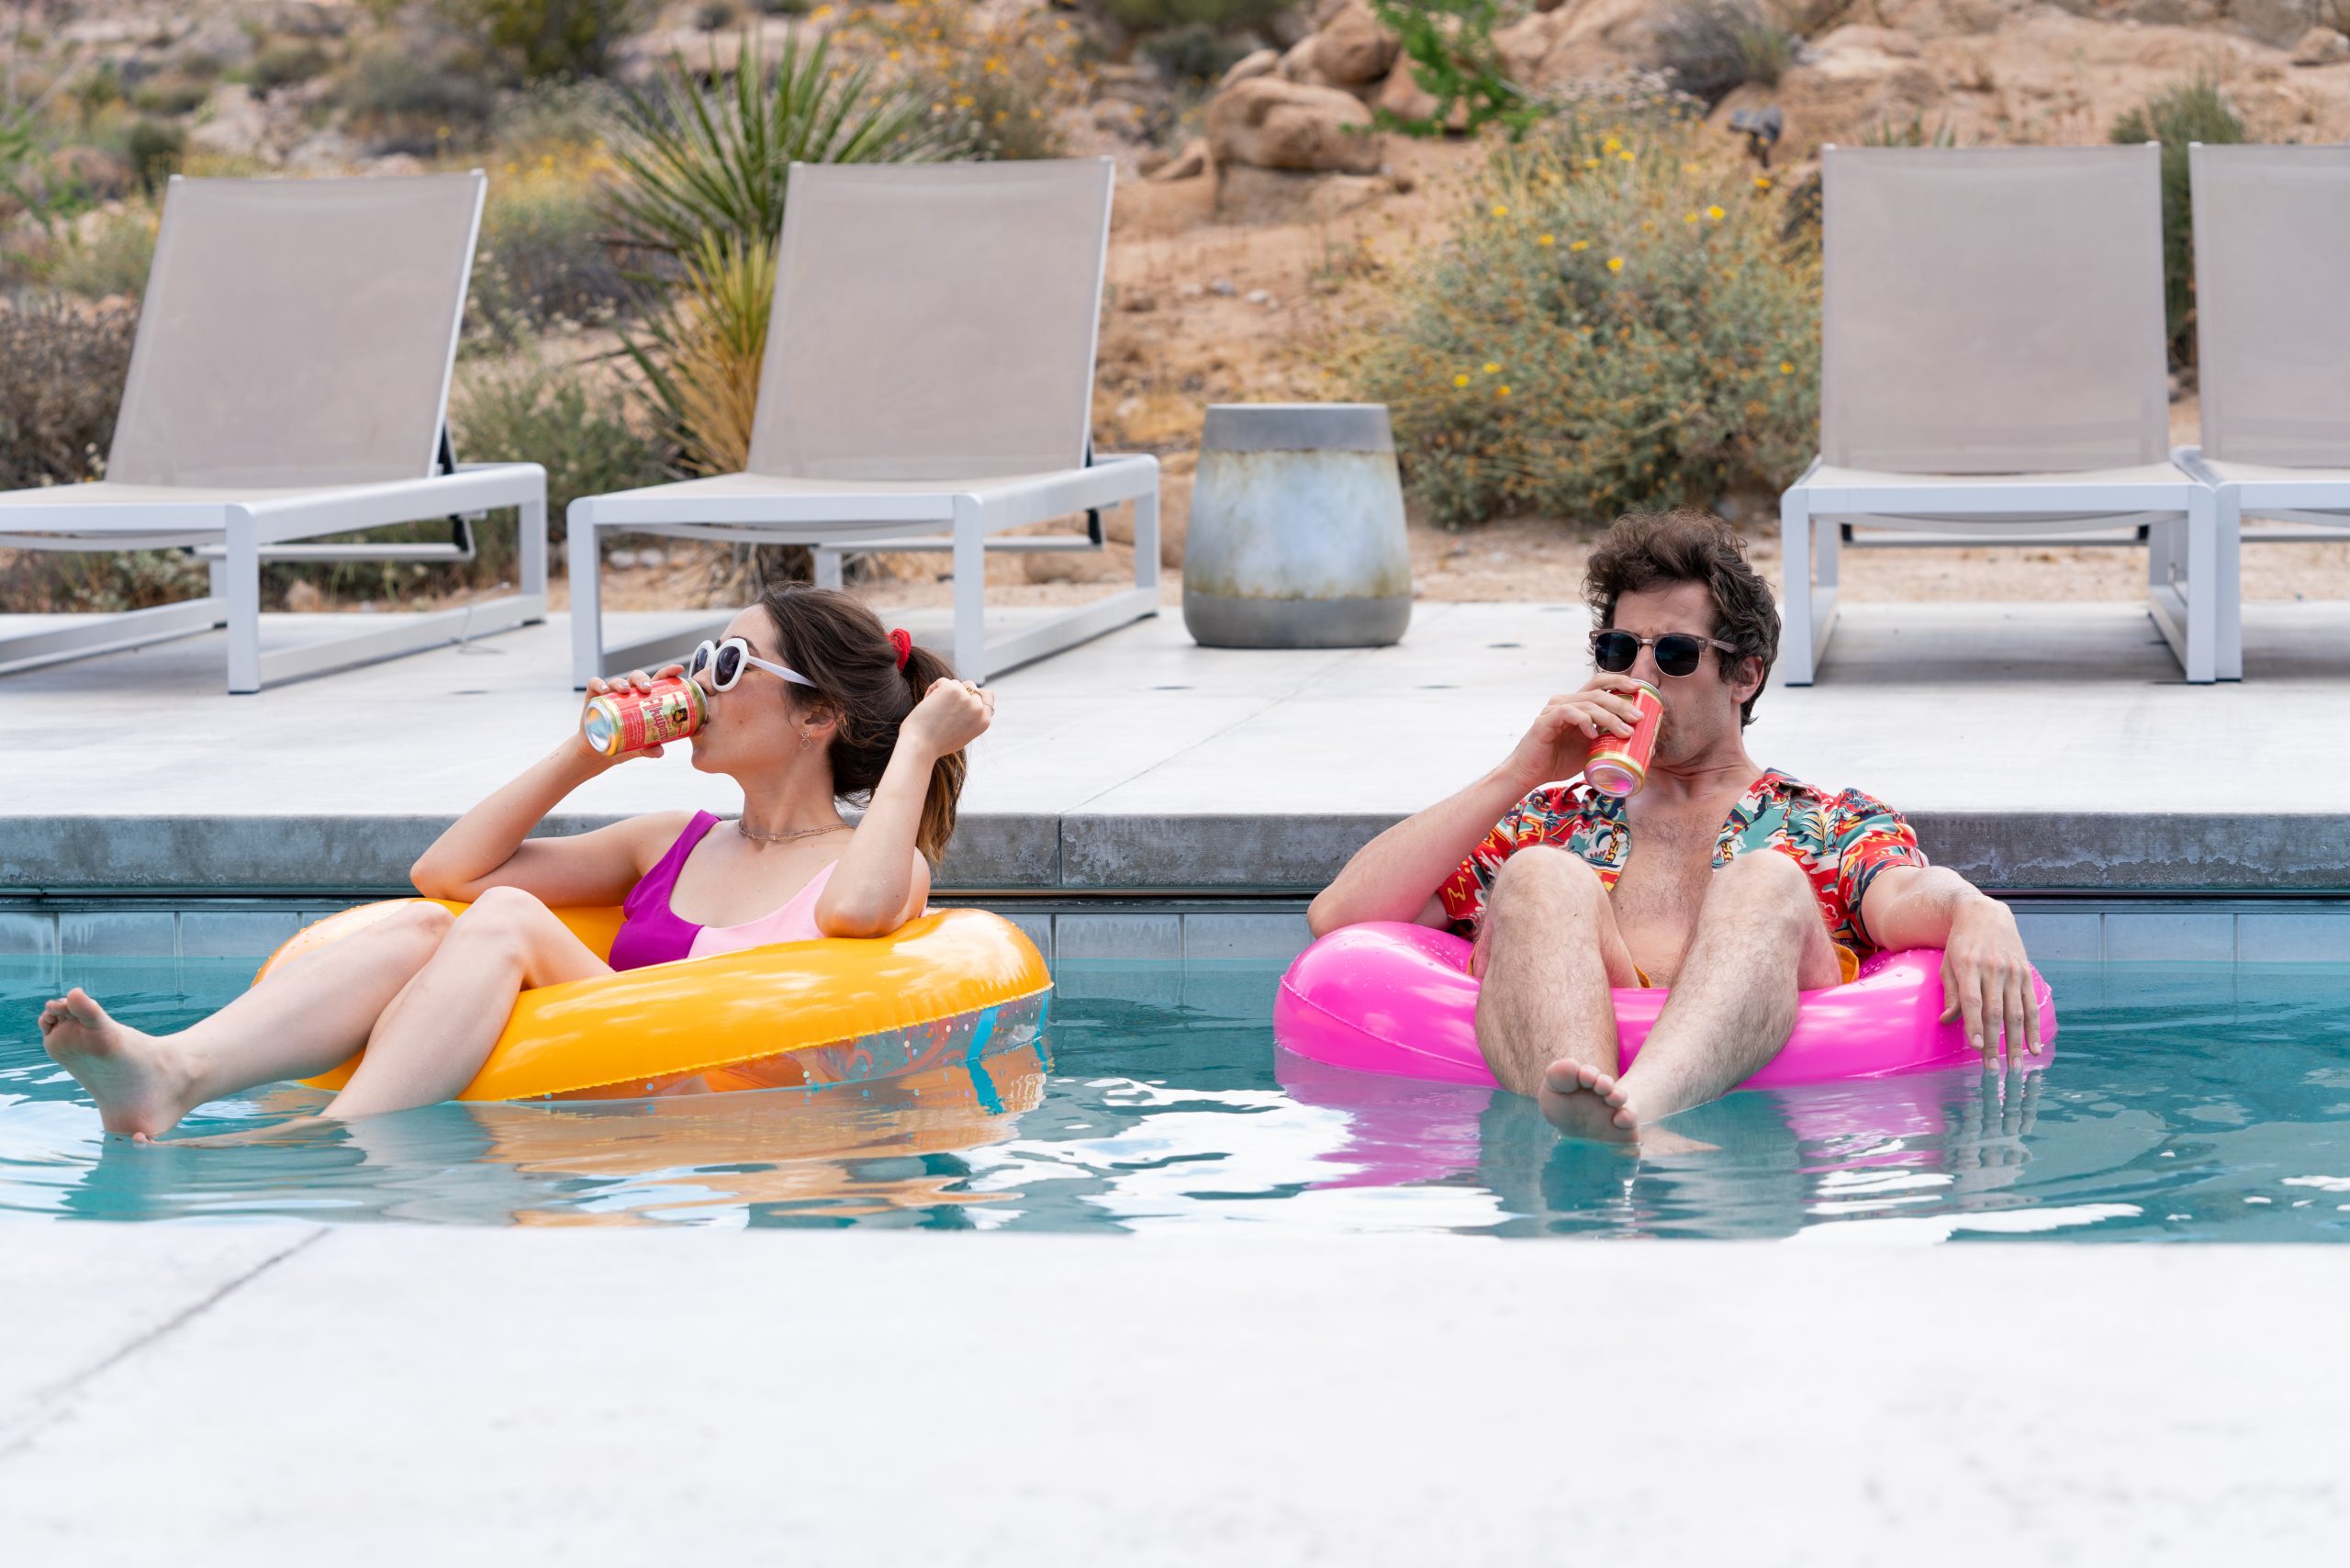 Film Review – Palm Springs (2020)